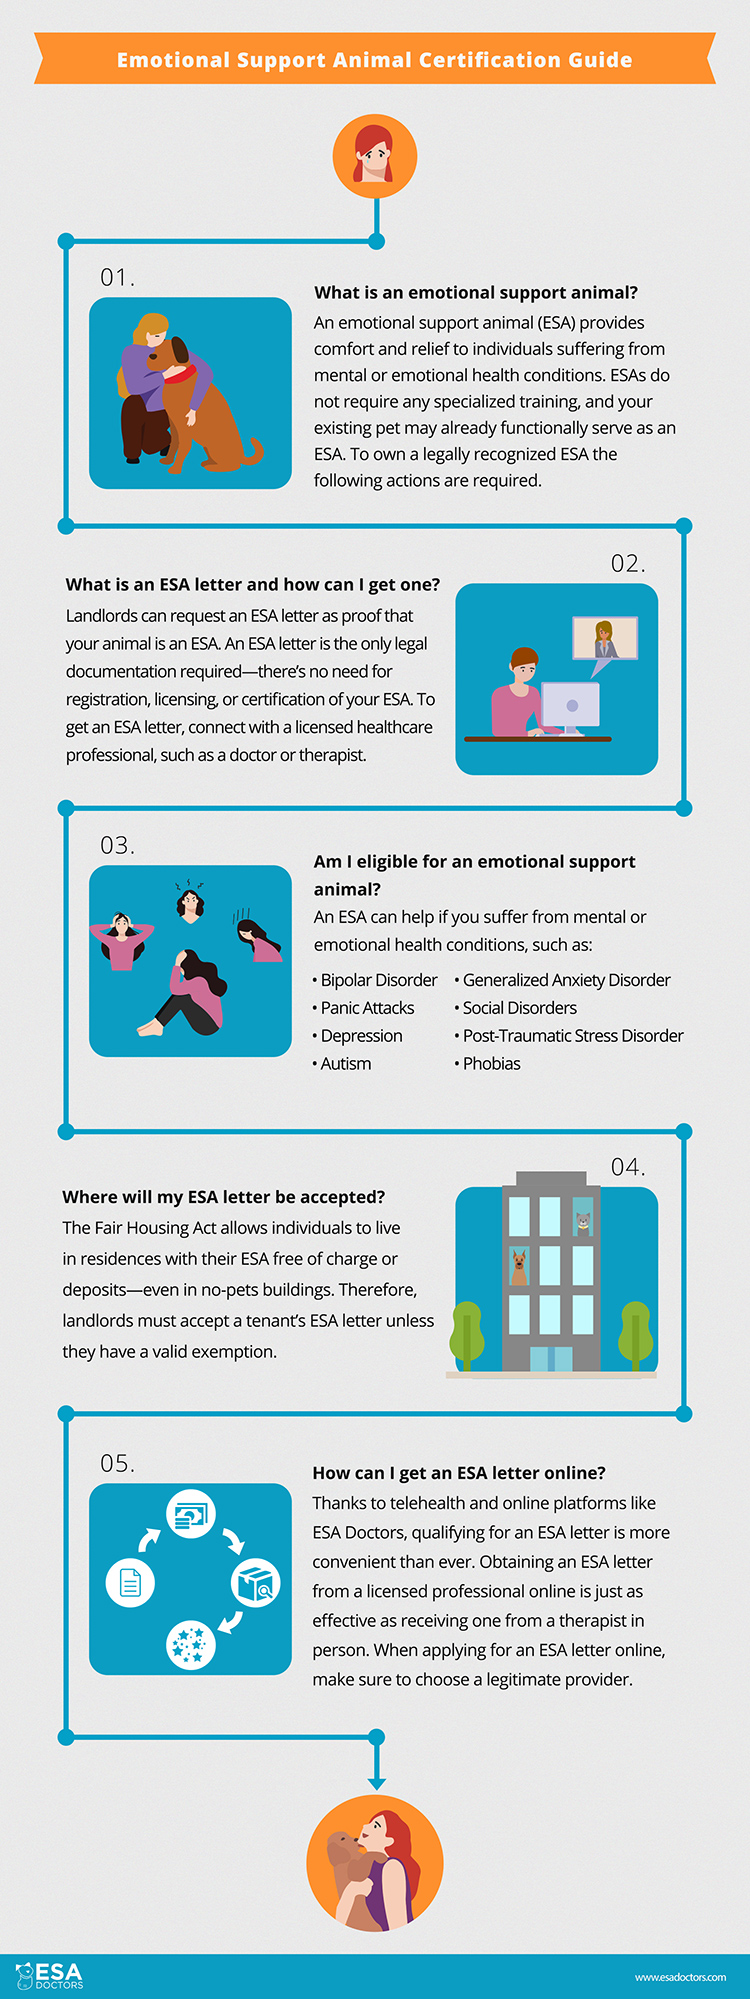 Emotional Support Animal Certification Guide - Infographic - ESA Doctors